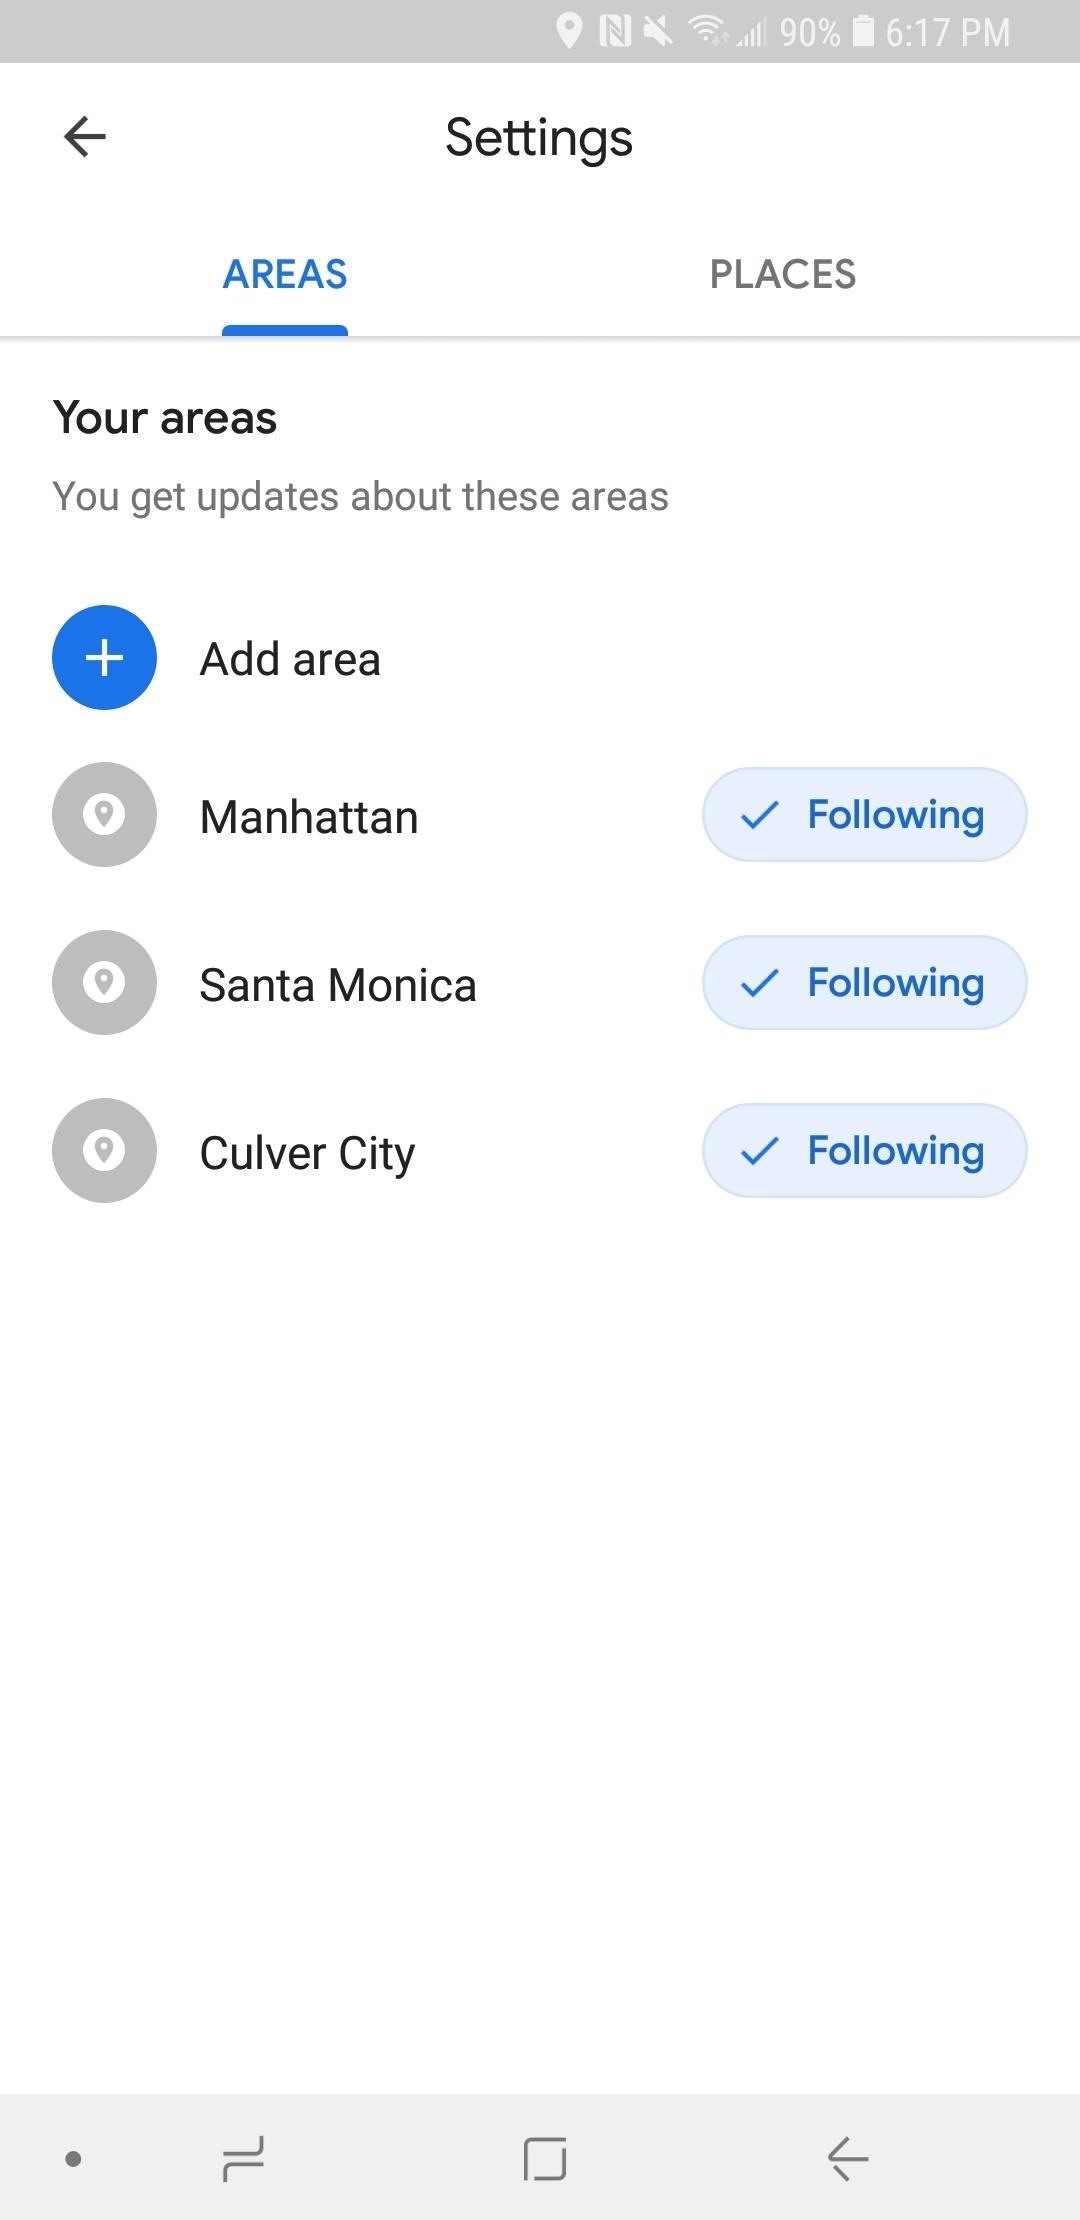 Follow Businesses on Google Maps to Stay Updated on Events & News for Your Favorite Spots